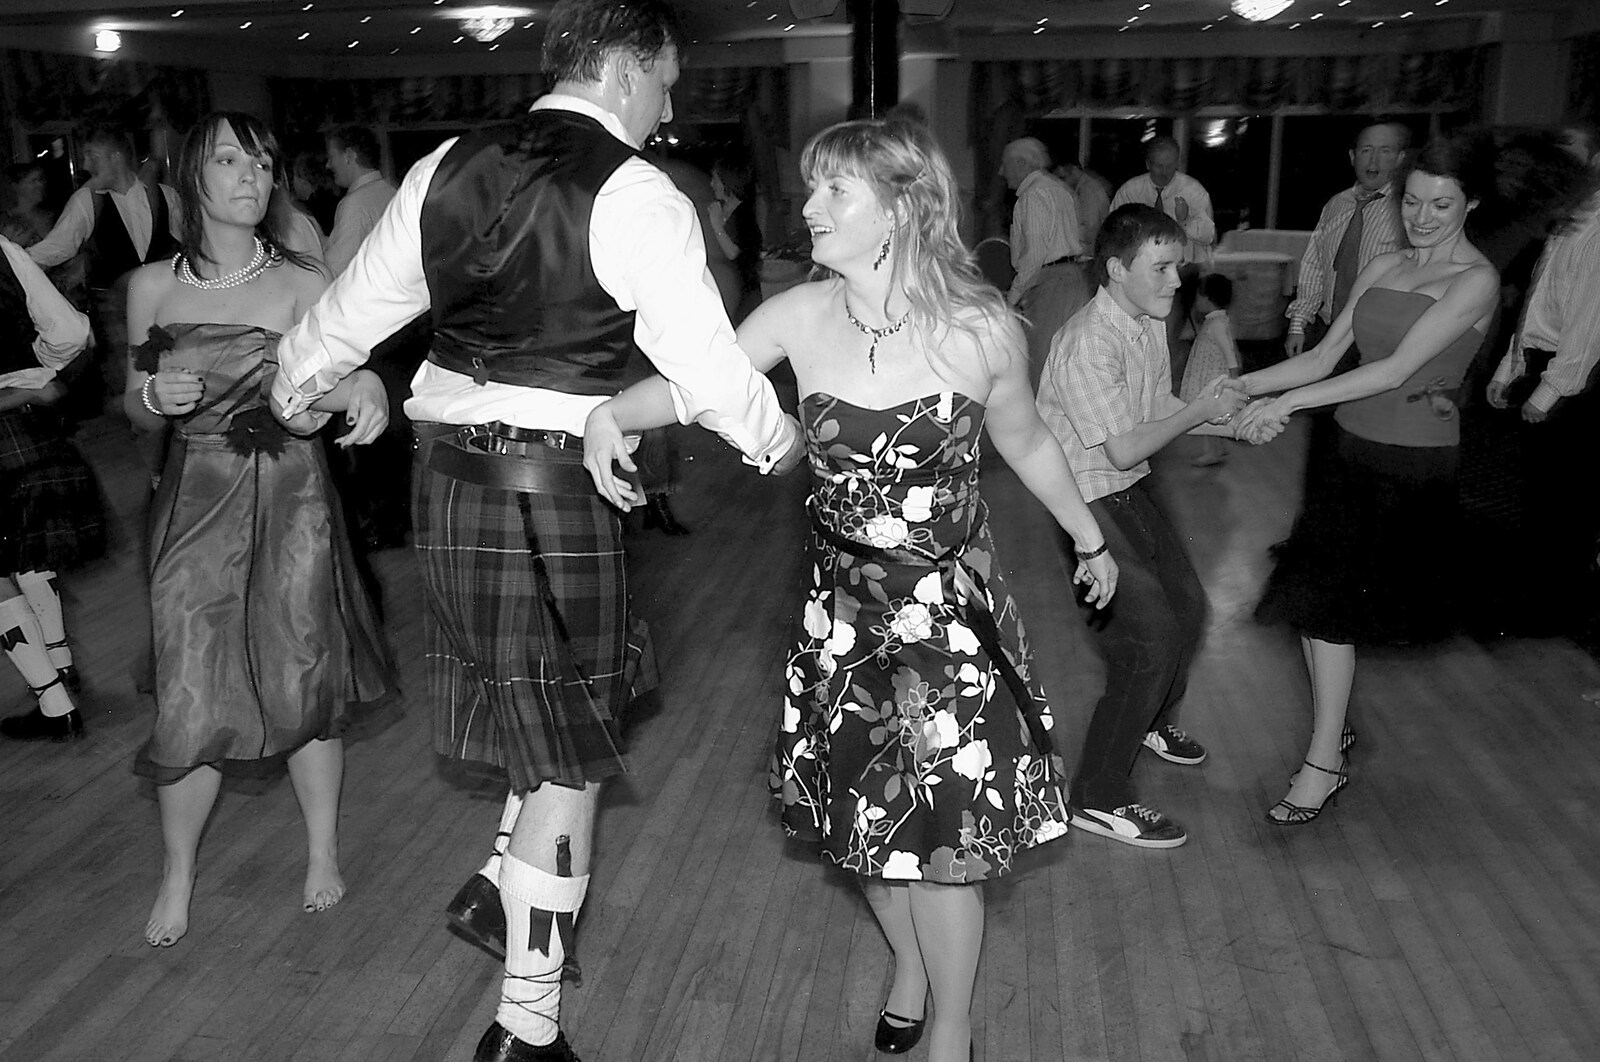 Loads of ceilidh dancing from Caroline and Chris's Wedding, Spanish Point, County Clare, Ireland - 26th October 2006